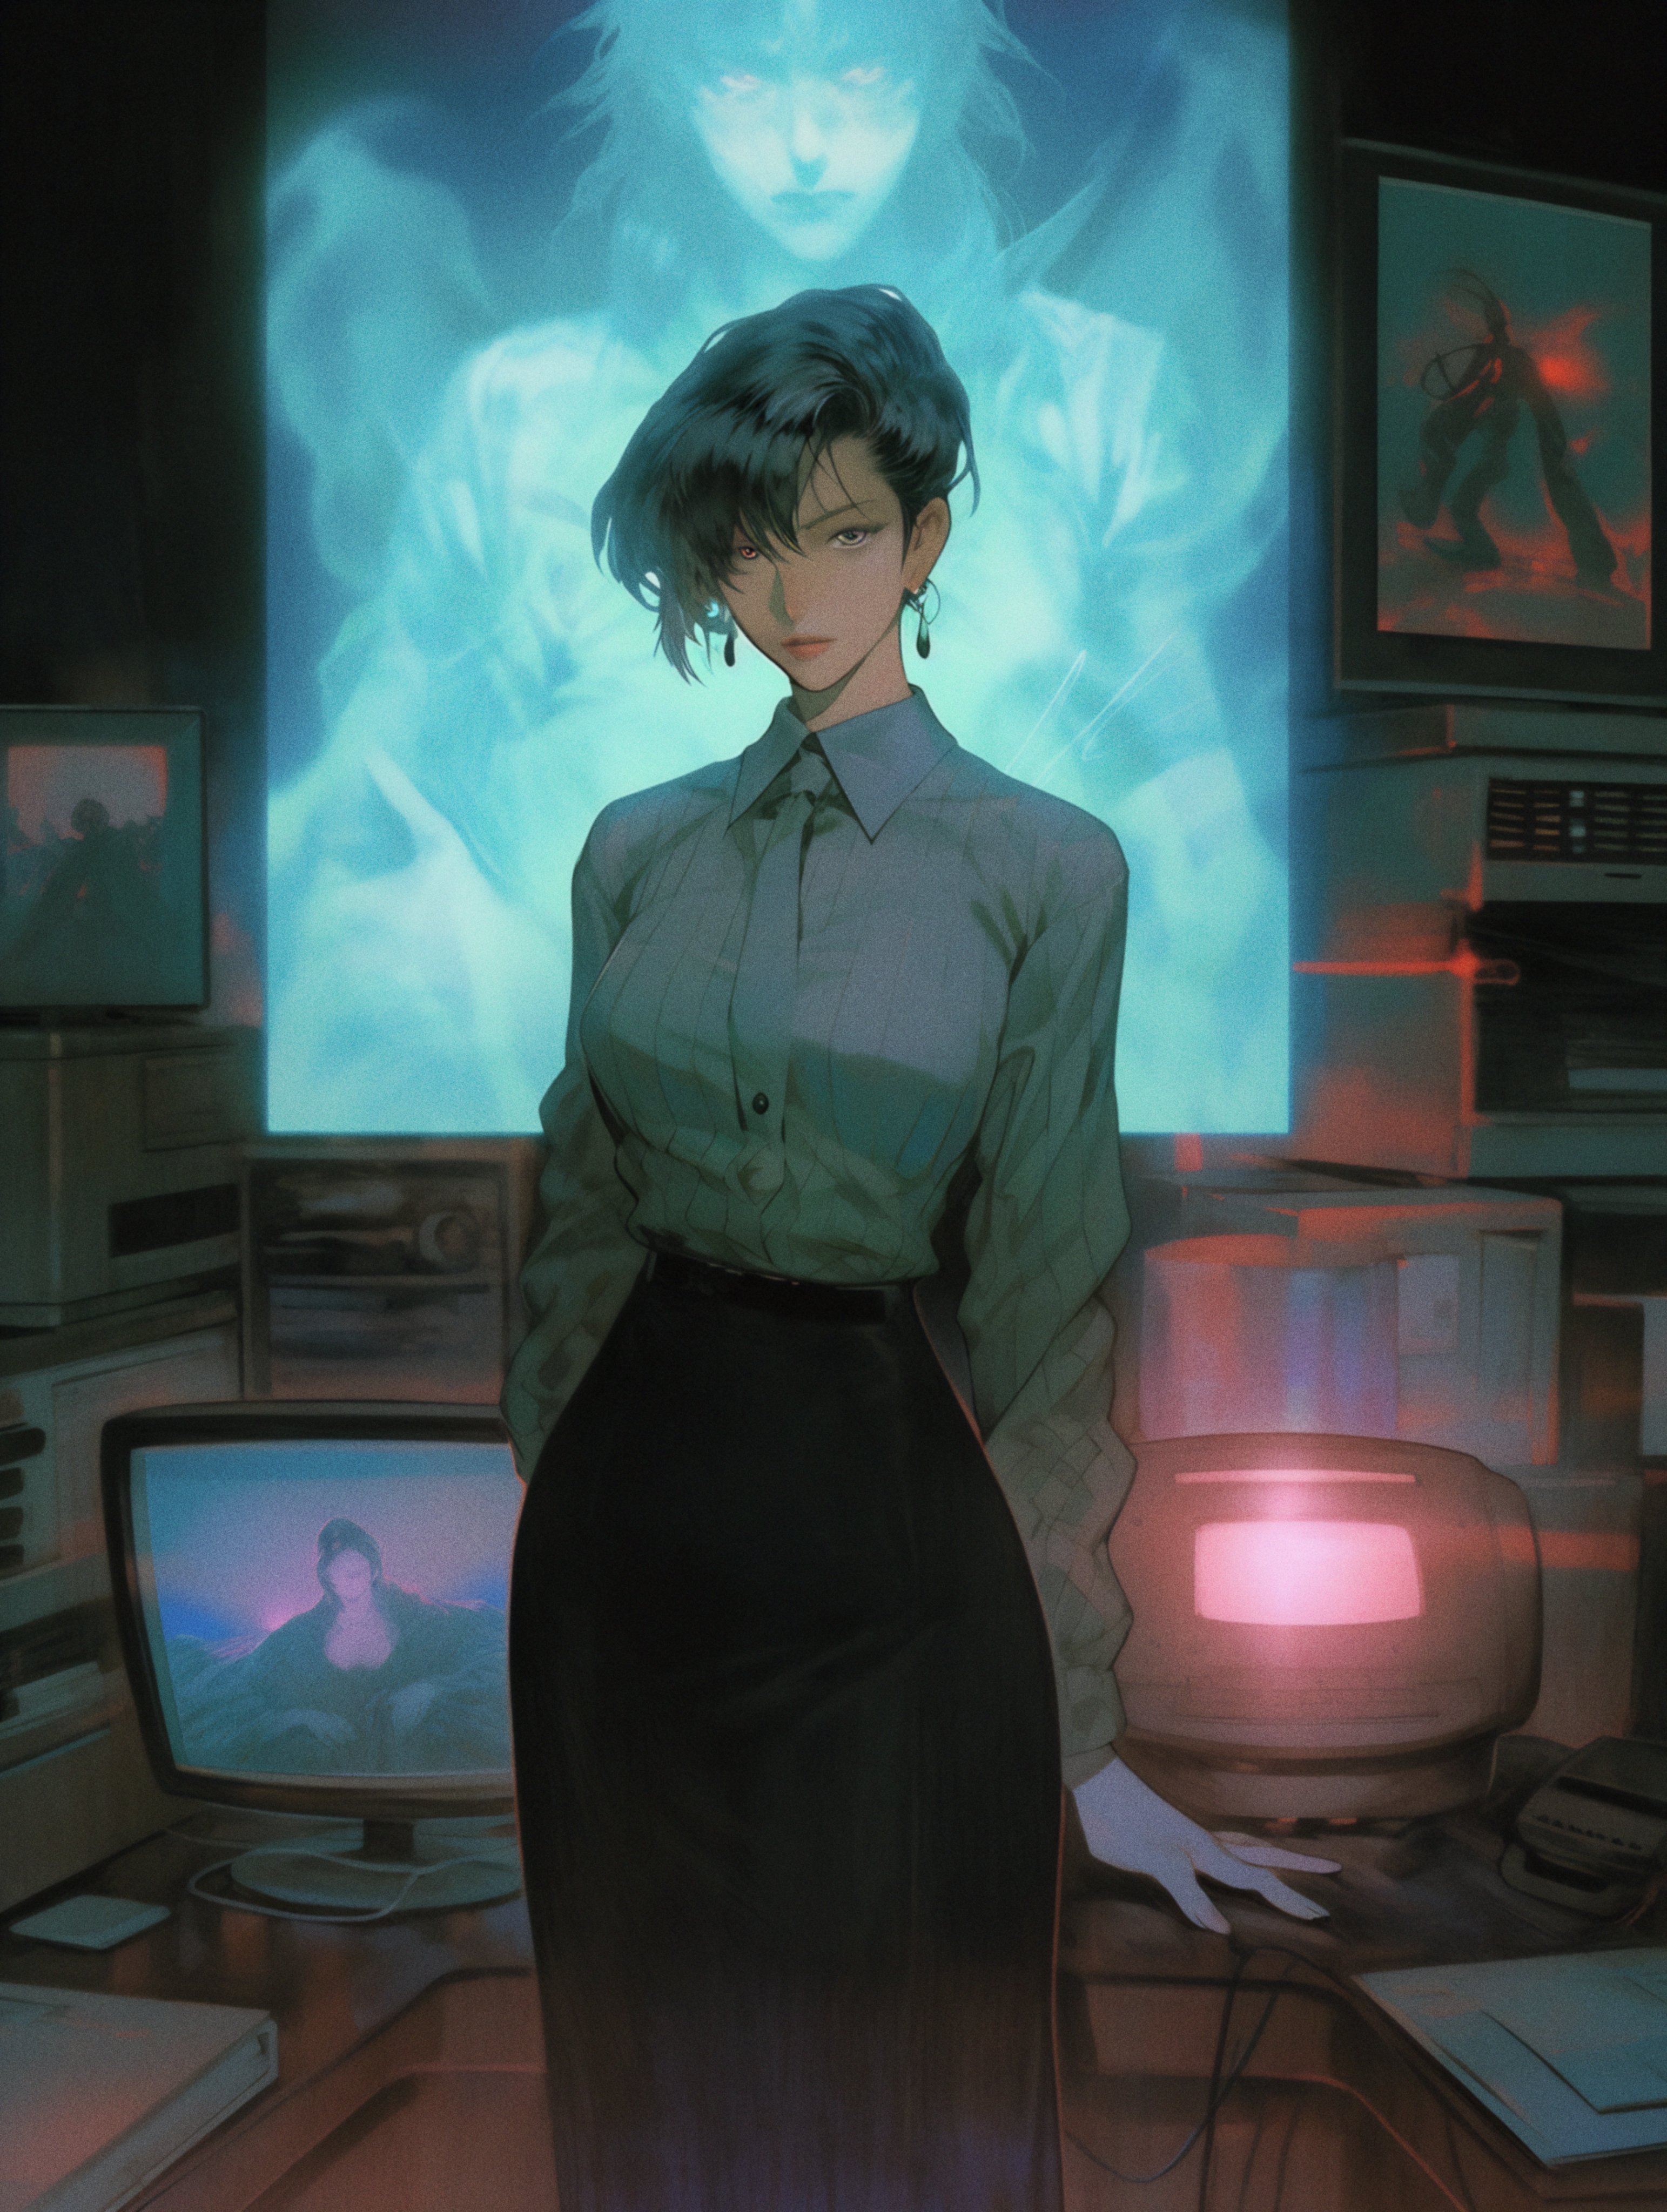 Axynchro Retro Style Anime Girls Portrait Display Standing Technology Looking At Viewer Short Hair 3086x4096